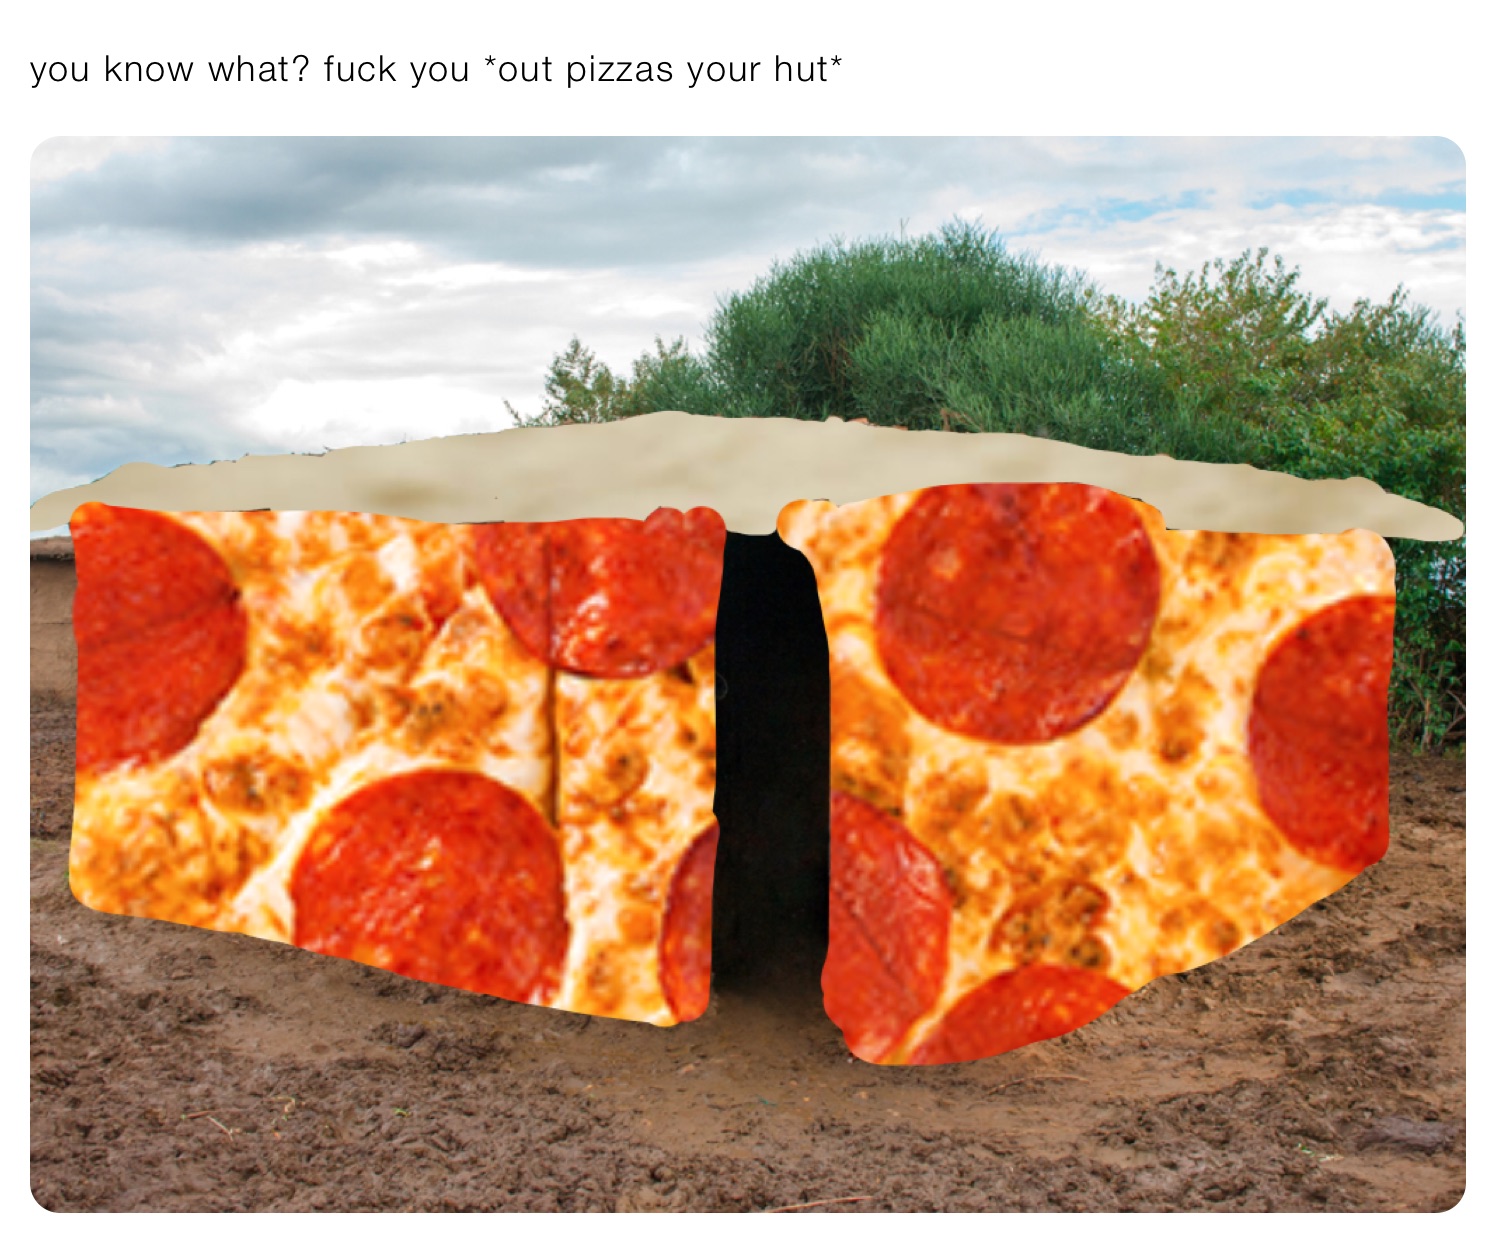 you know what? fuck you *out pizzas your hut*